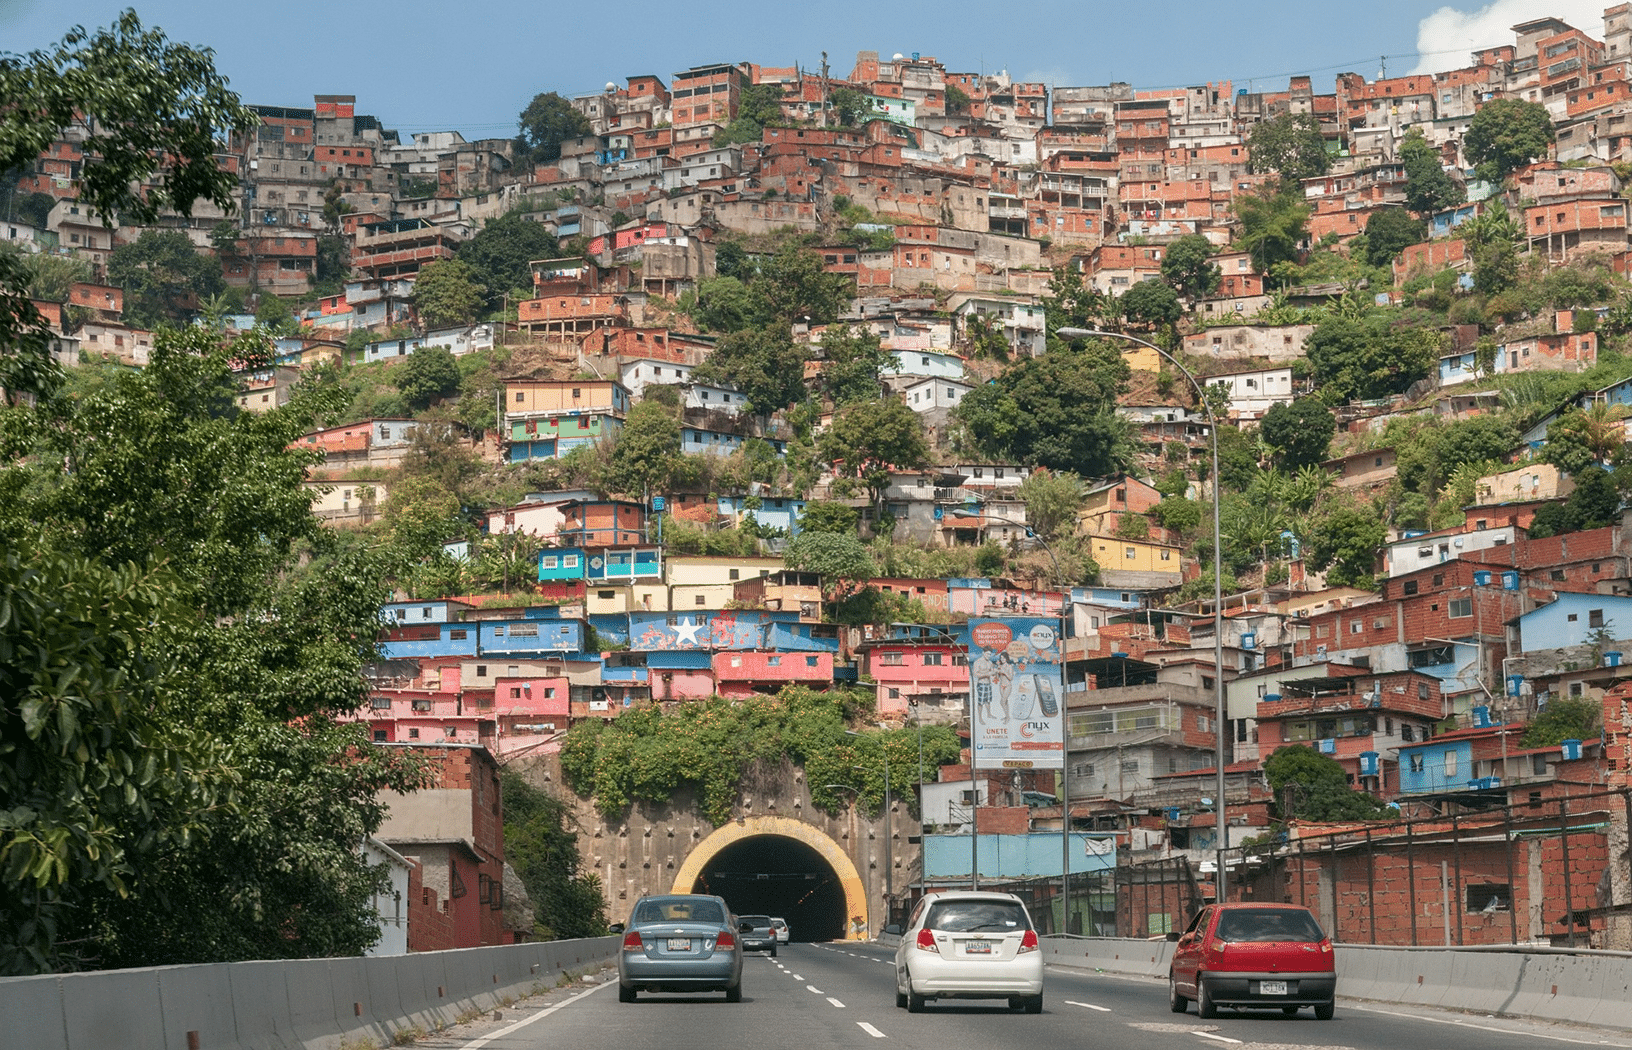 Venezuelans suffer debilitating poverty. The image here shows a Venezuelan barrio built on a hill with a freeway tunnel at the bottom.